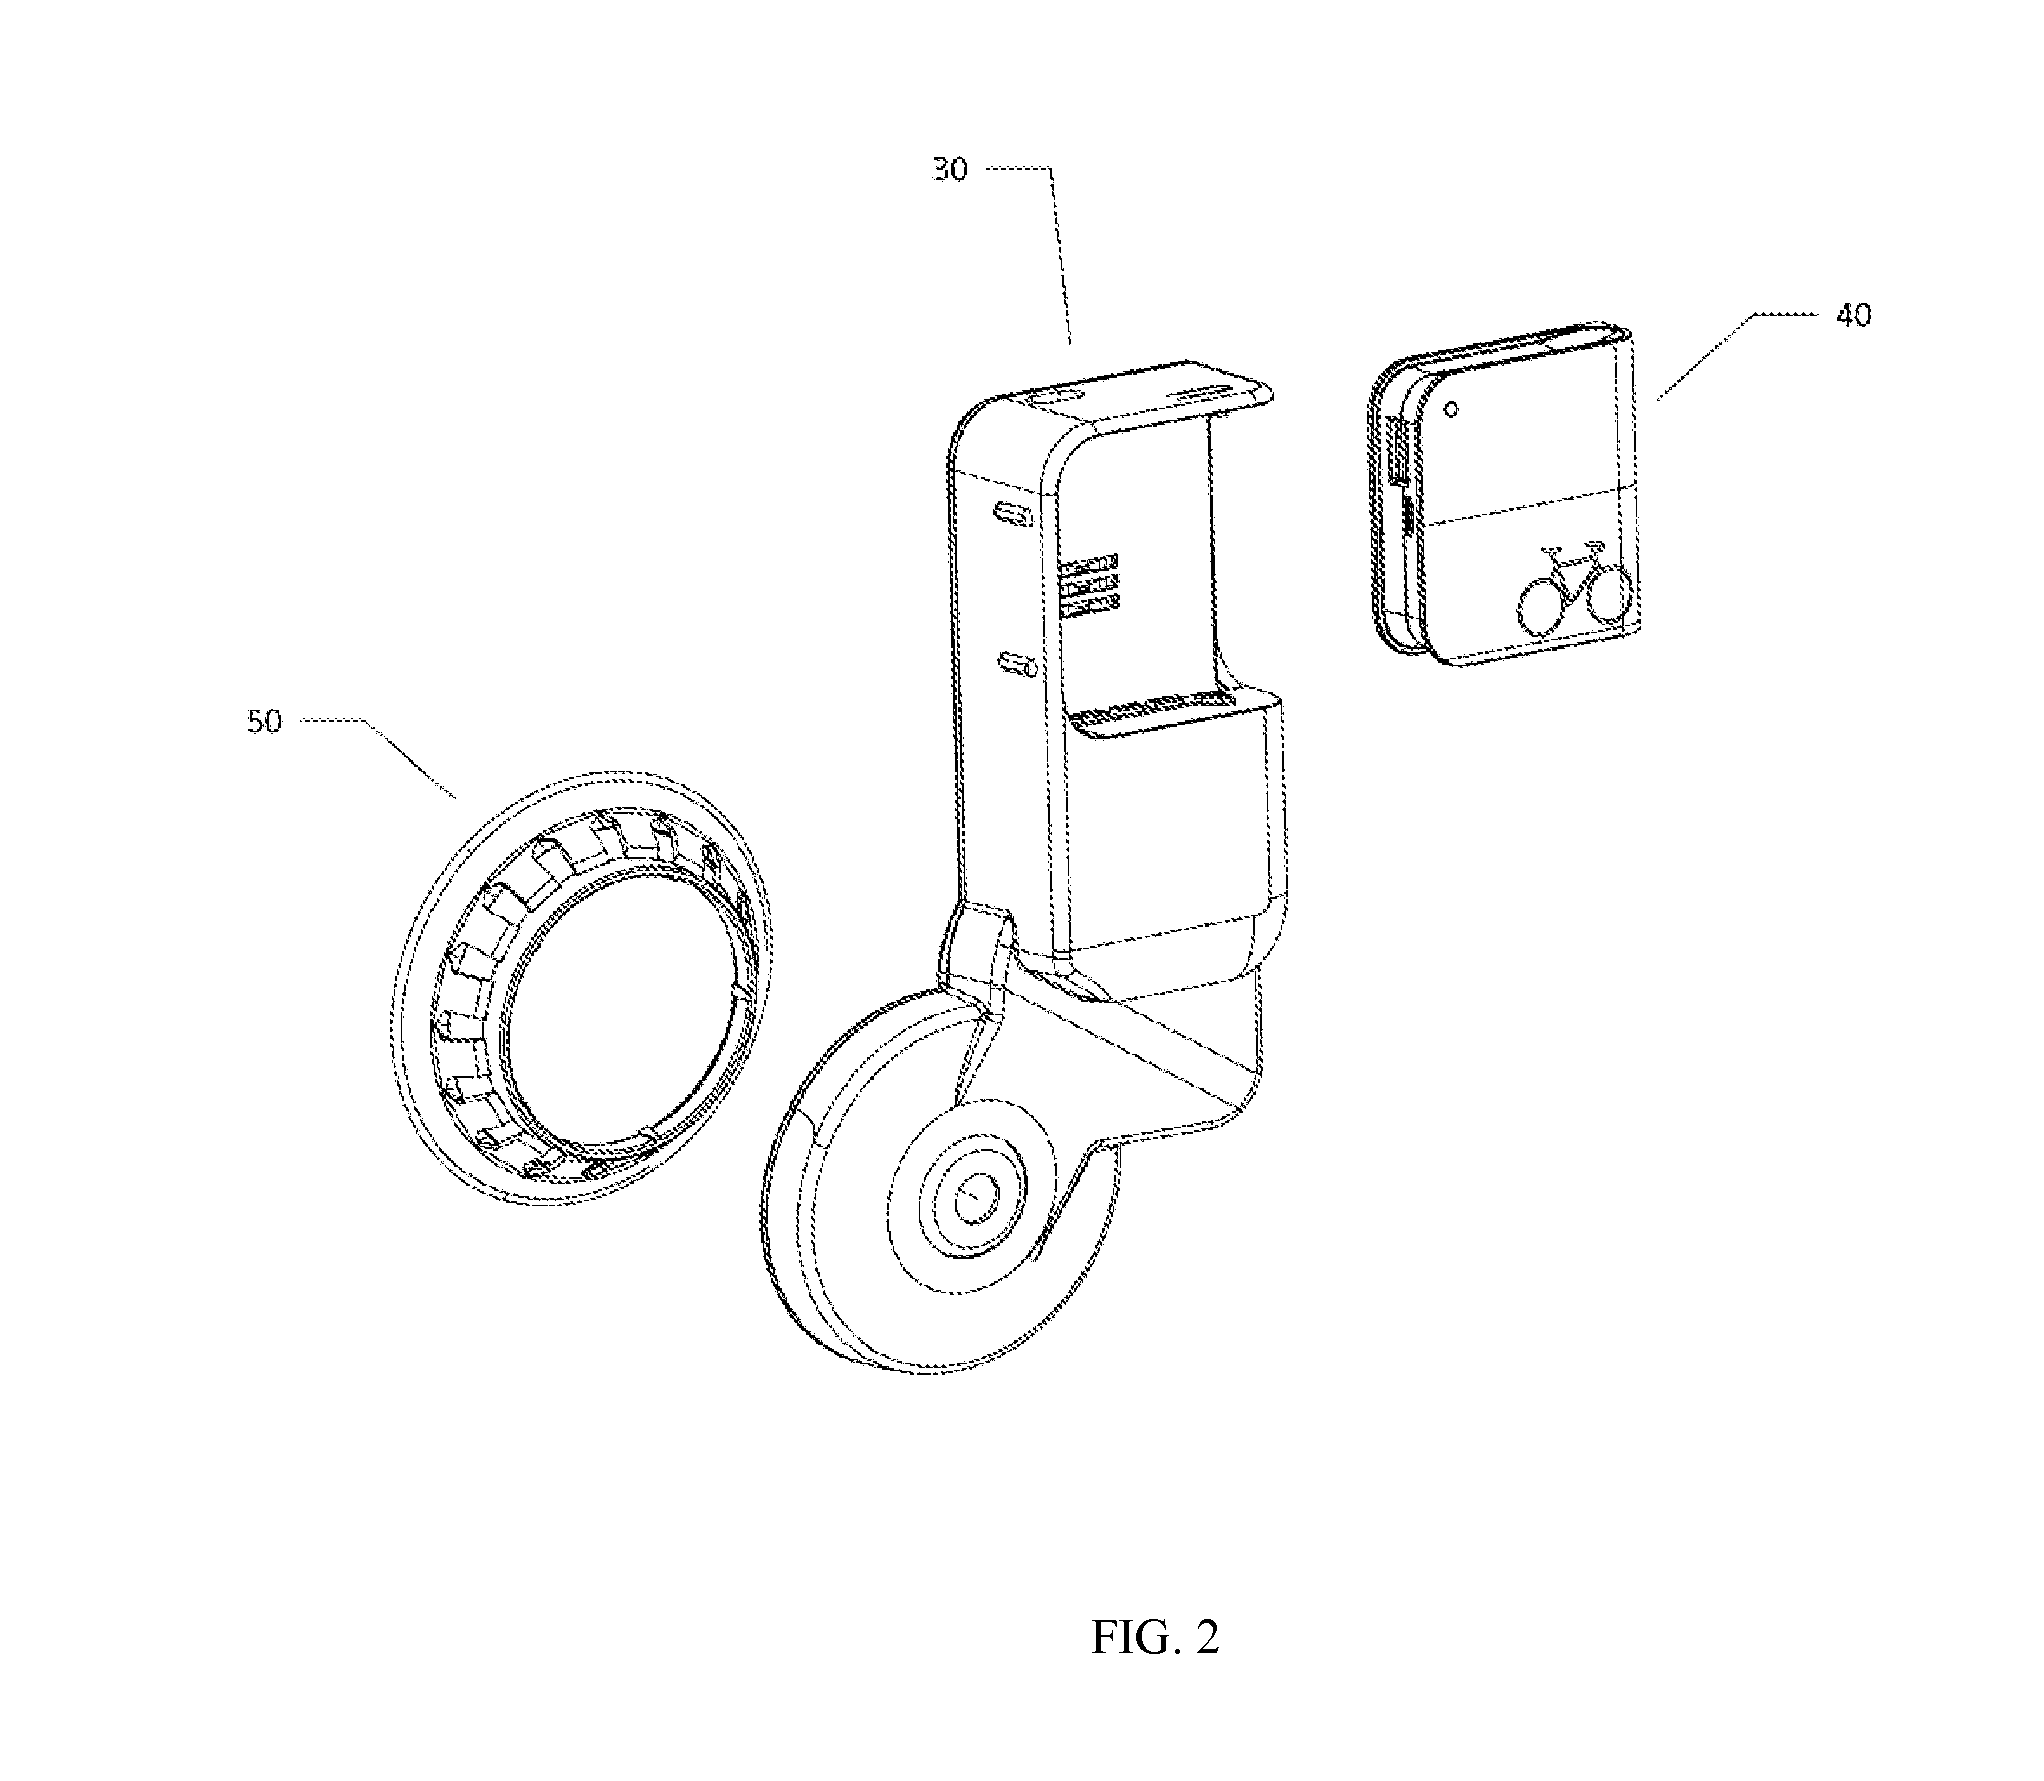 Combined device for power generation, power regulation, and removable power storage for a bicycle